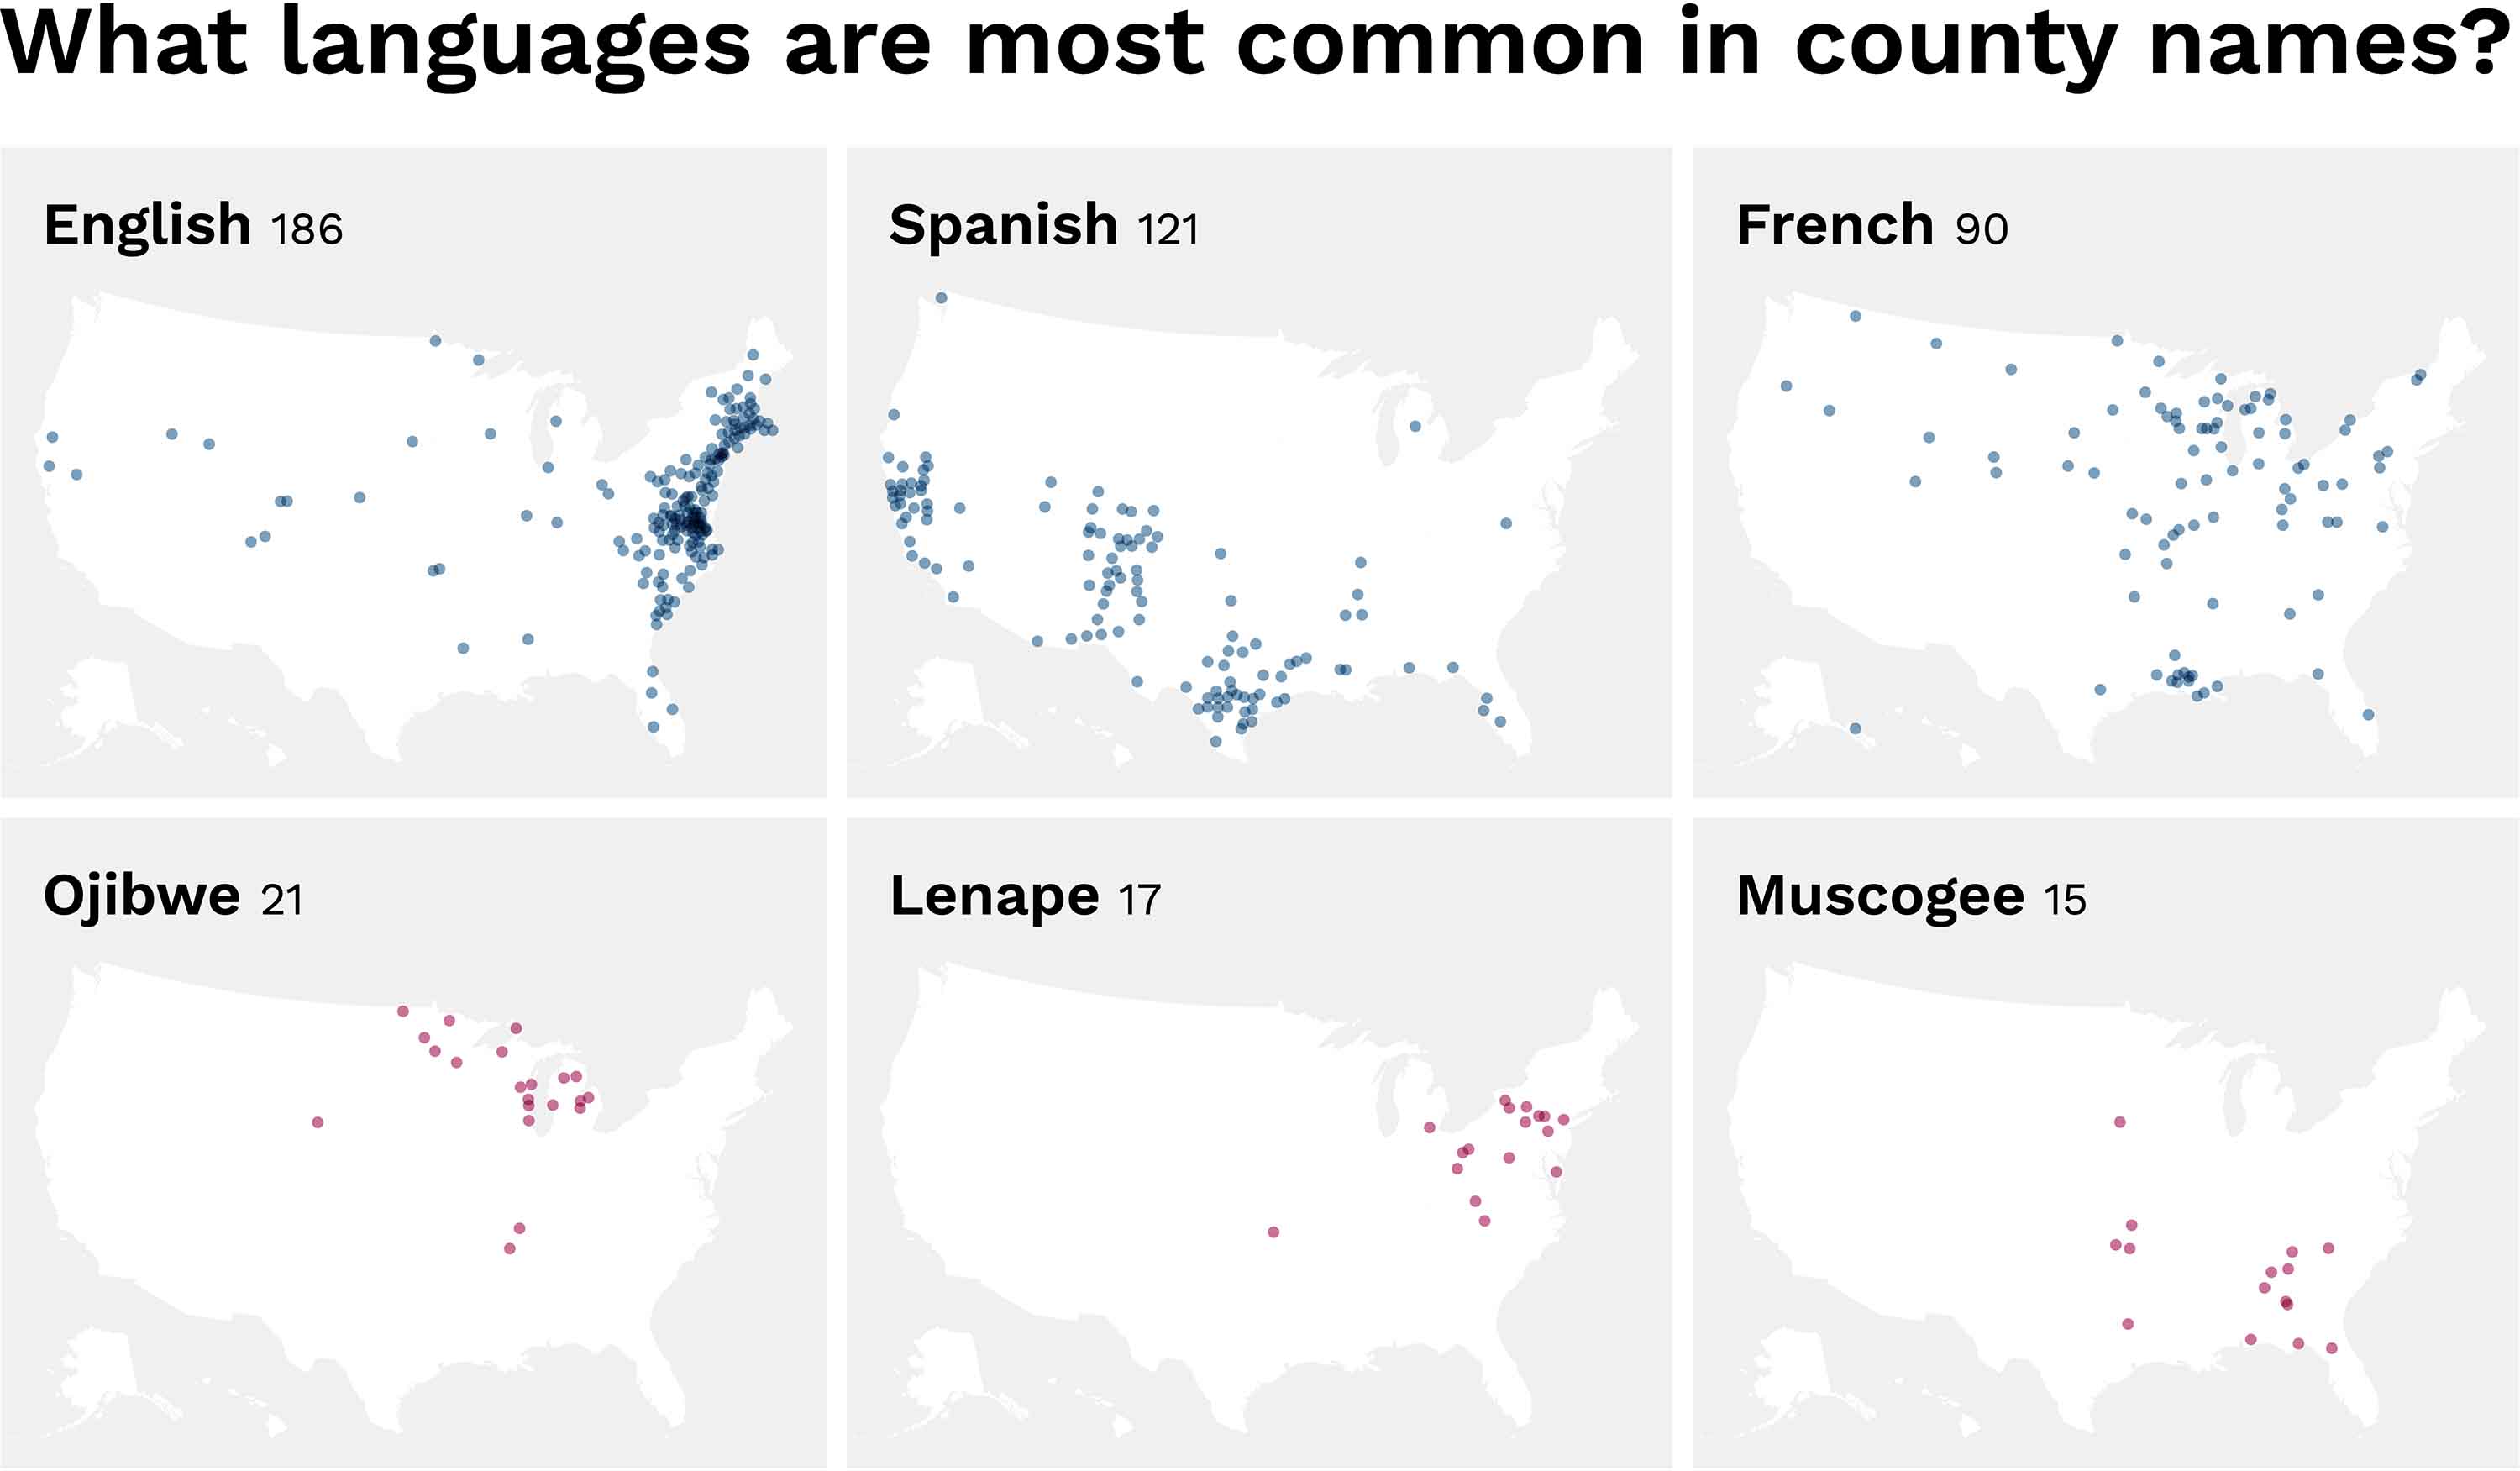 A series of US maps, showing the counties named in each of the following languages: English (186), Spanish (121), French (90), Ojibwe (21), Lenape (17), and Muscogee (15), respectively.